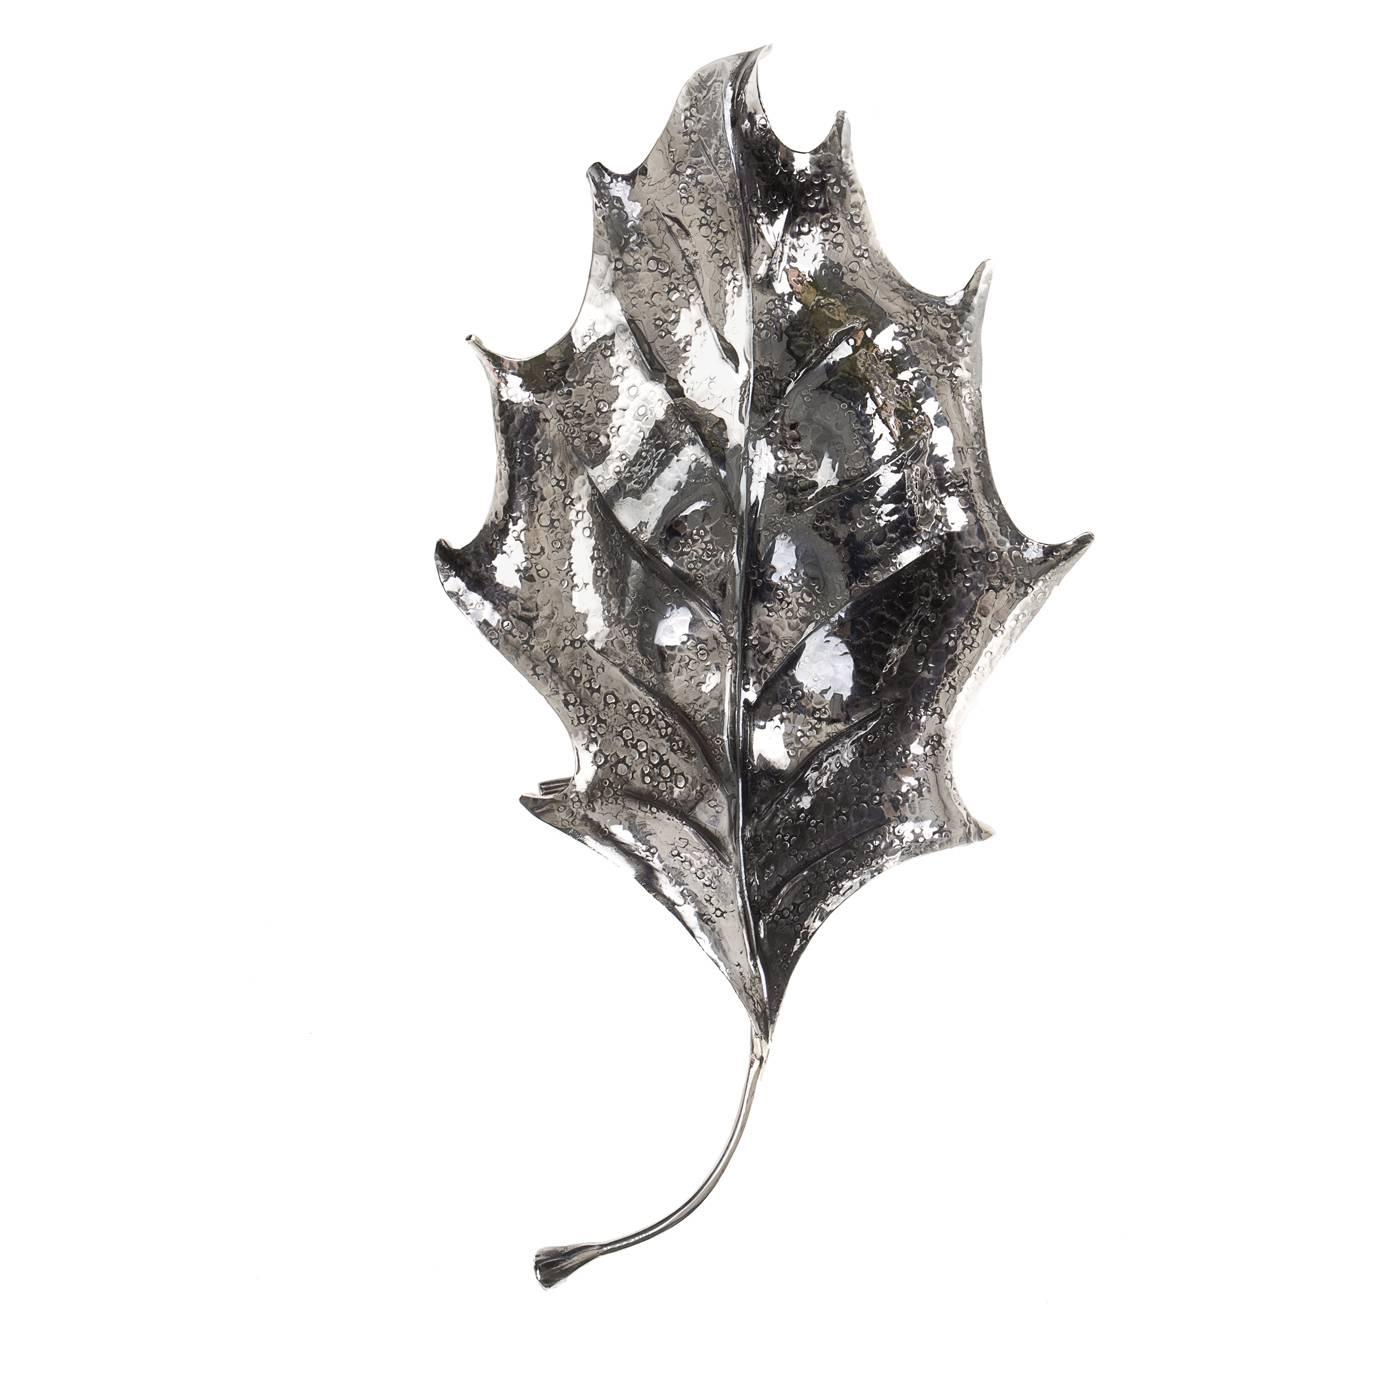 Single holly leaf made of scintillating sterling silver. This exquisite piece was embossed and entirely hand-engraved by the master silversmiths of Fratelli Lisi, showing remarkable detail on the blade, midrib and veins.